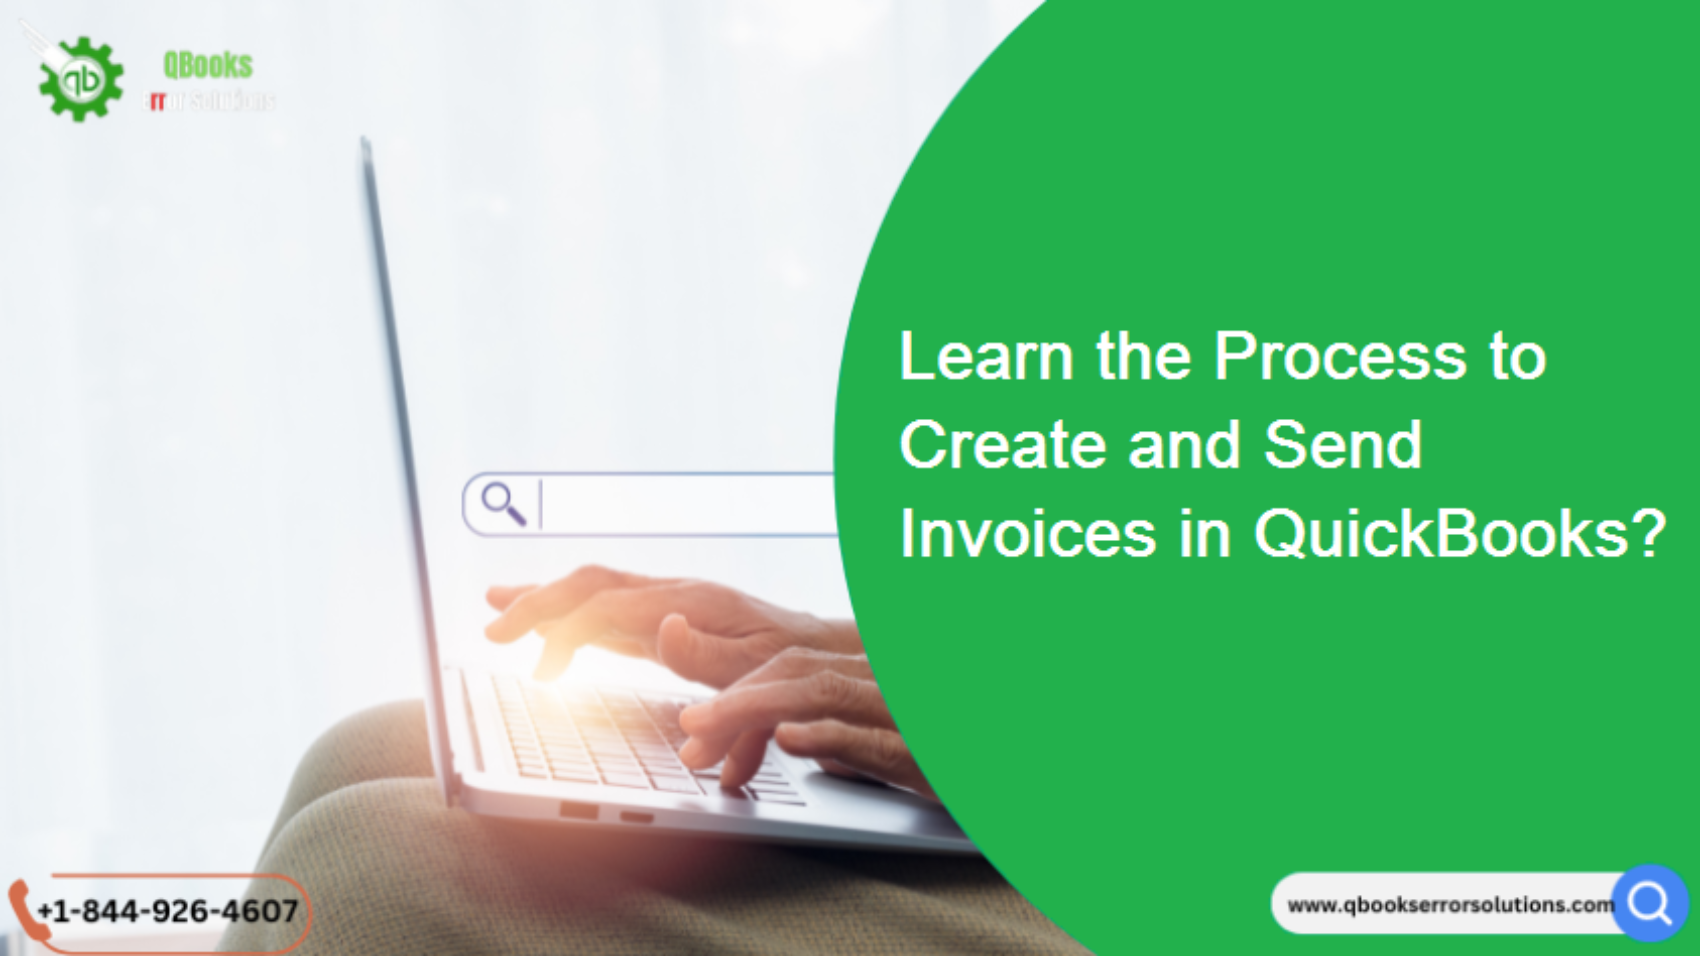 How to Create and Send Invoices in QuickBooks